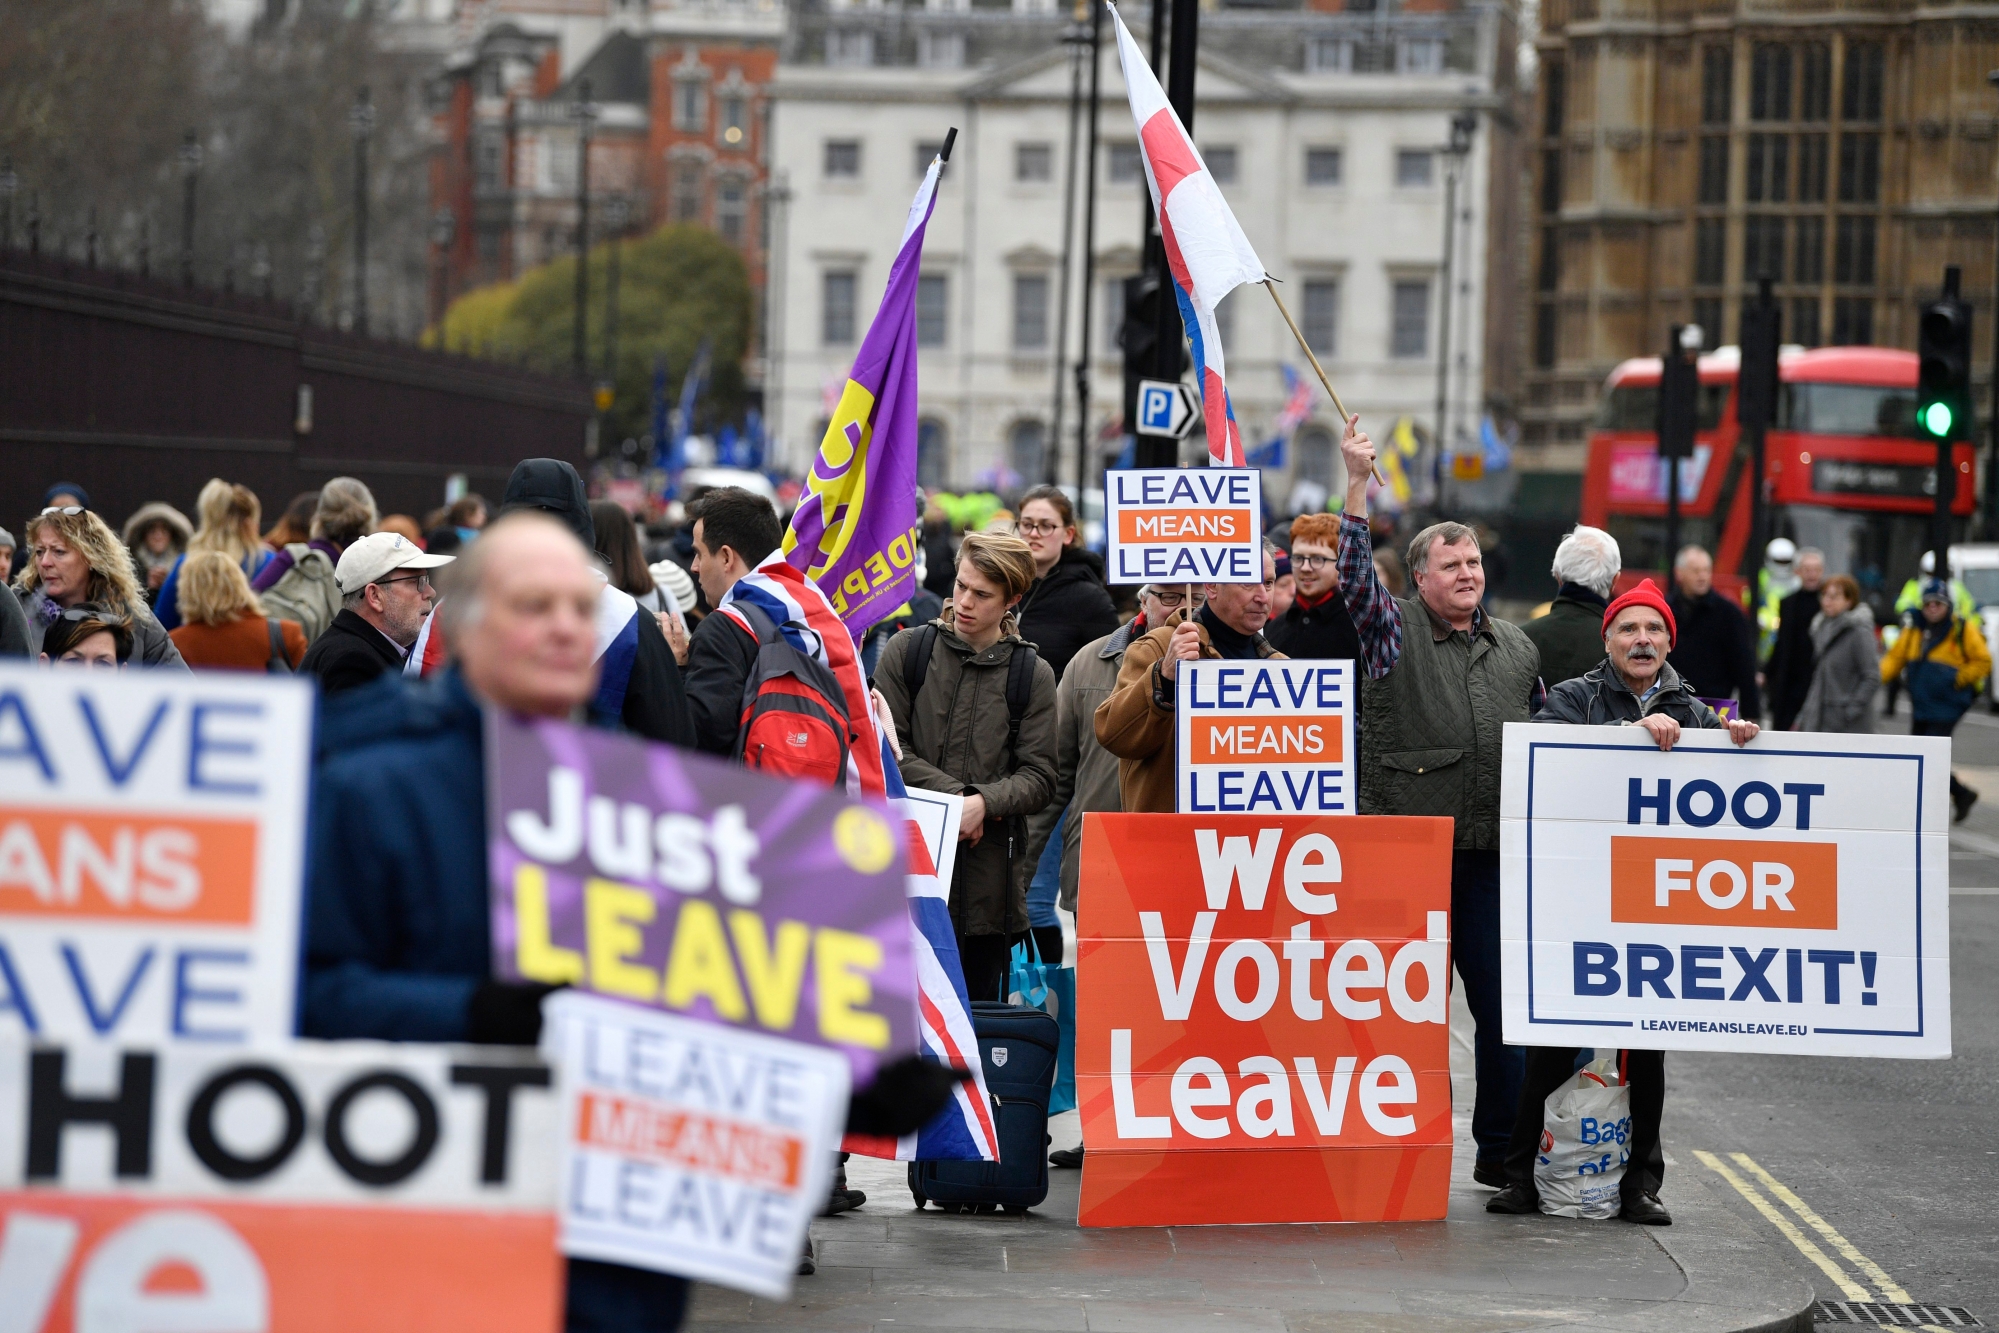 epa07329850 Pro-leave protesters demonstrate outside parliament  in London, Britain 29 January 2019. The House of Commons is set to vote on amendments to British Prime Minister Theresa May's Brexit plan in parliament on 29 January .  EPA/NEIL HALL BRITAIN PARLIAMENT BREXIT